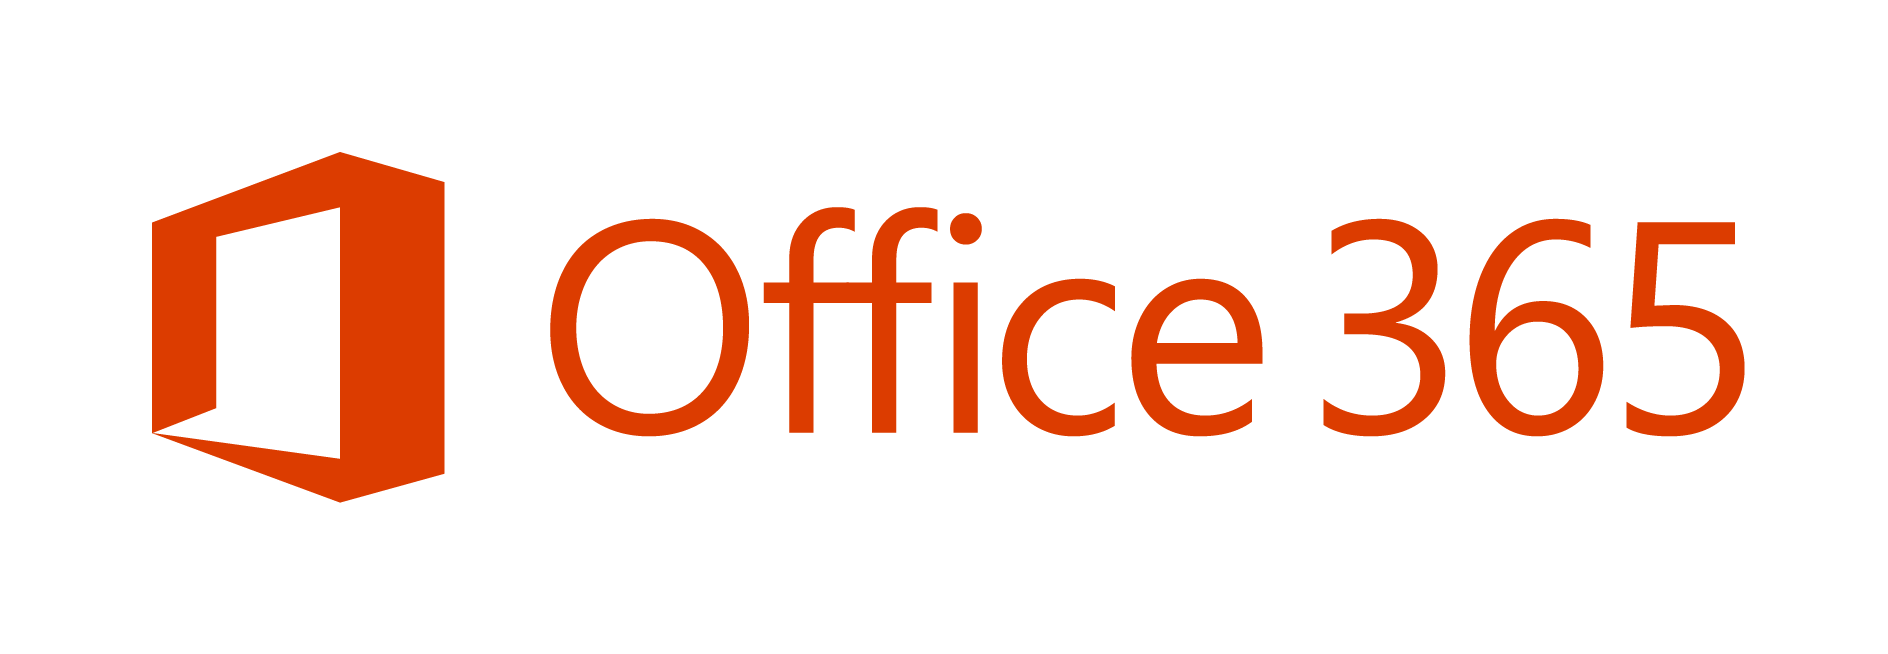 Microsoft 365, formerly Office 365, is a line of subscription services offered by Microsoft which adds to and includes the Microsoft Office product line.